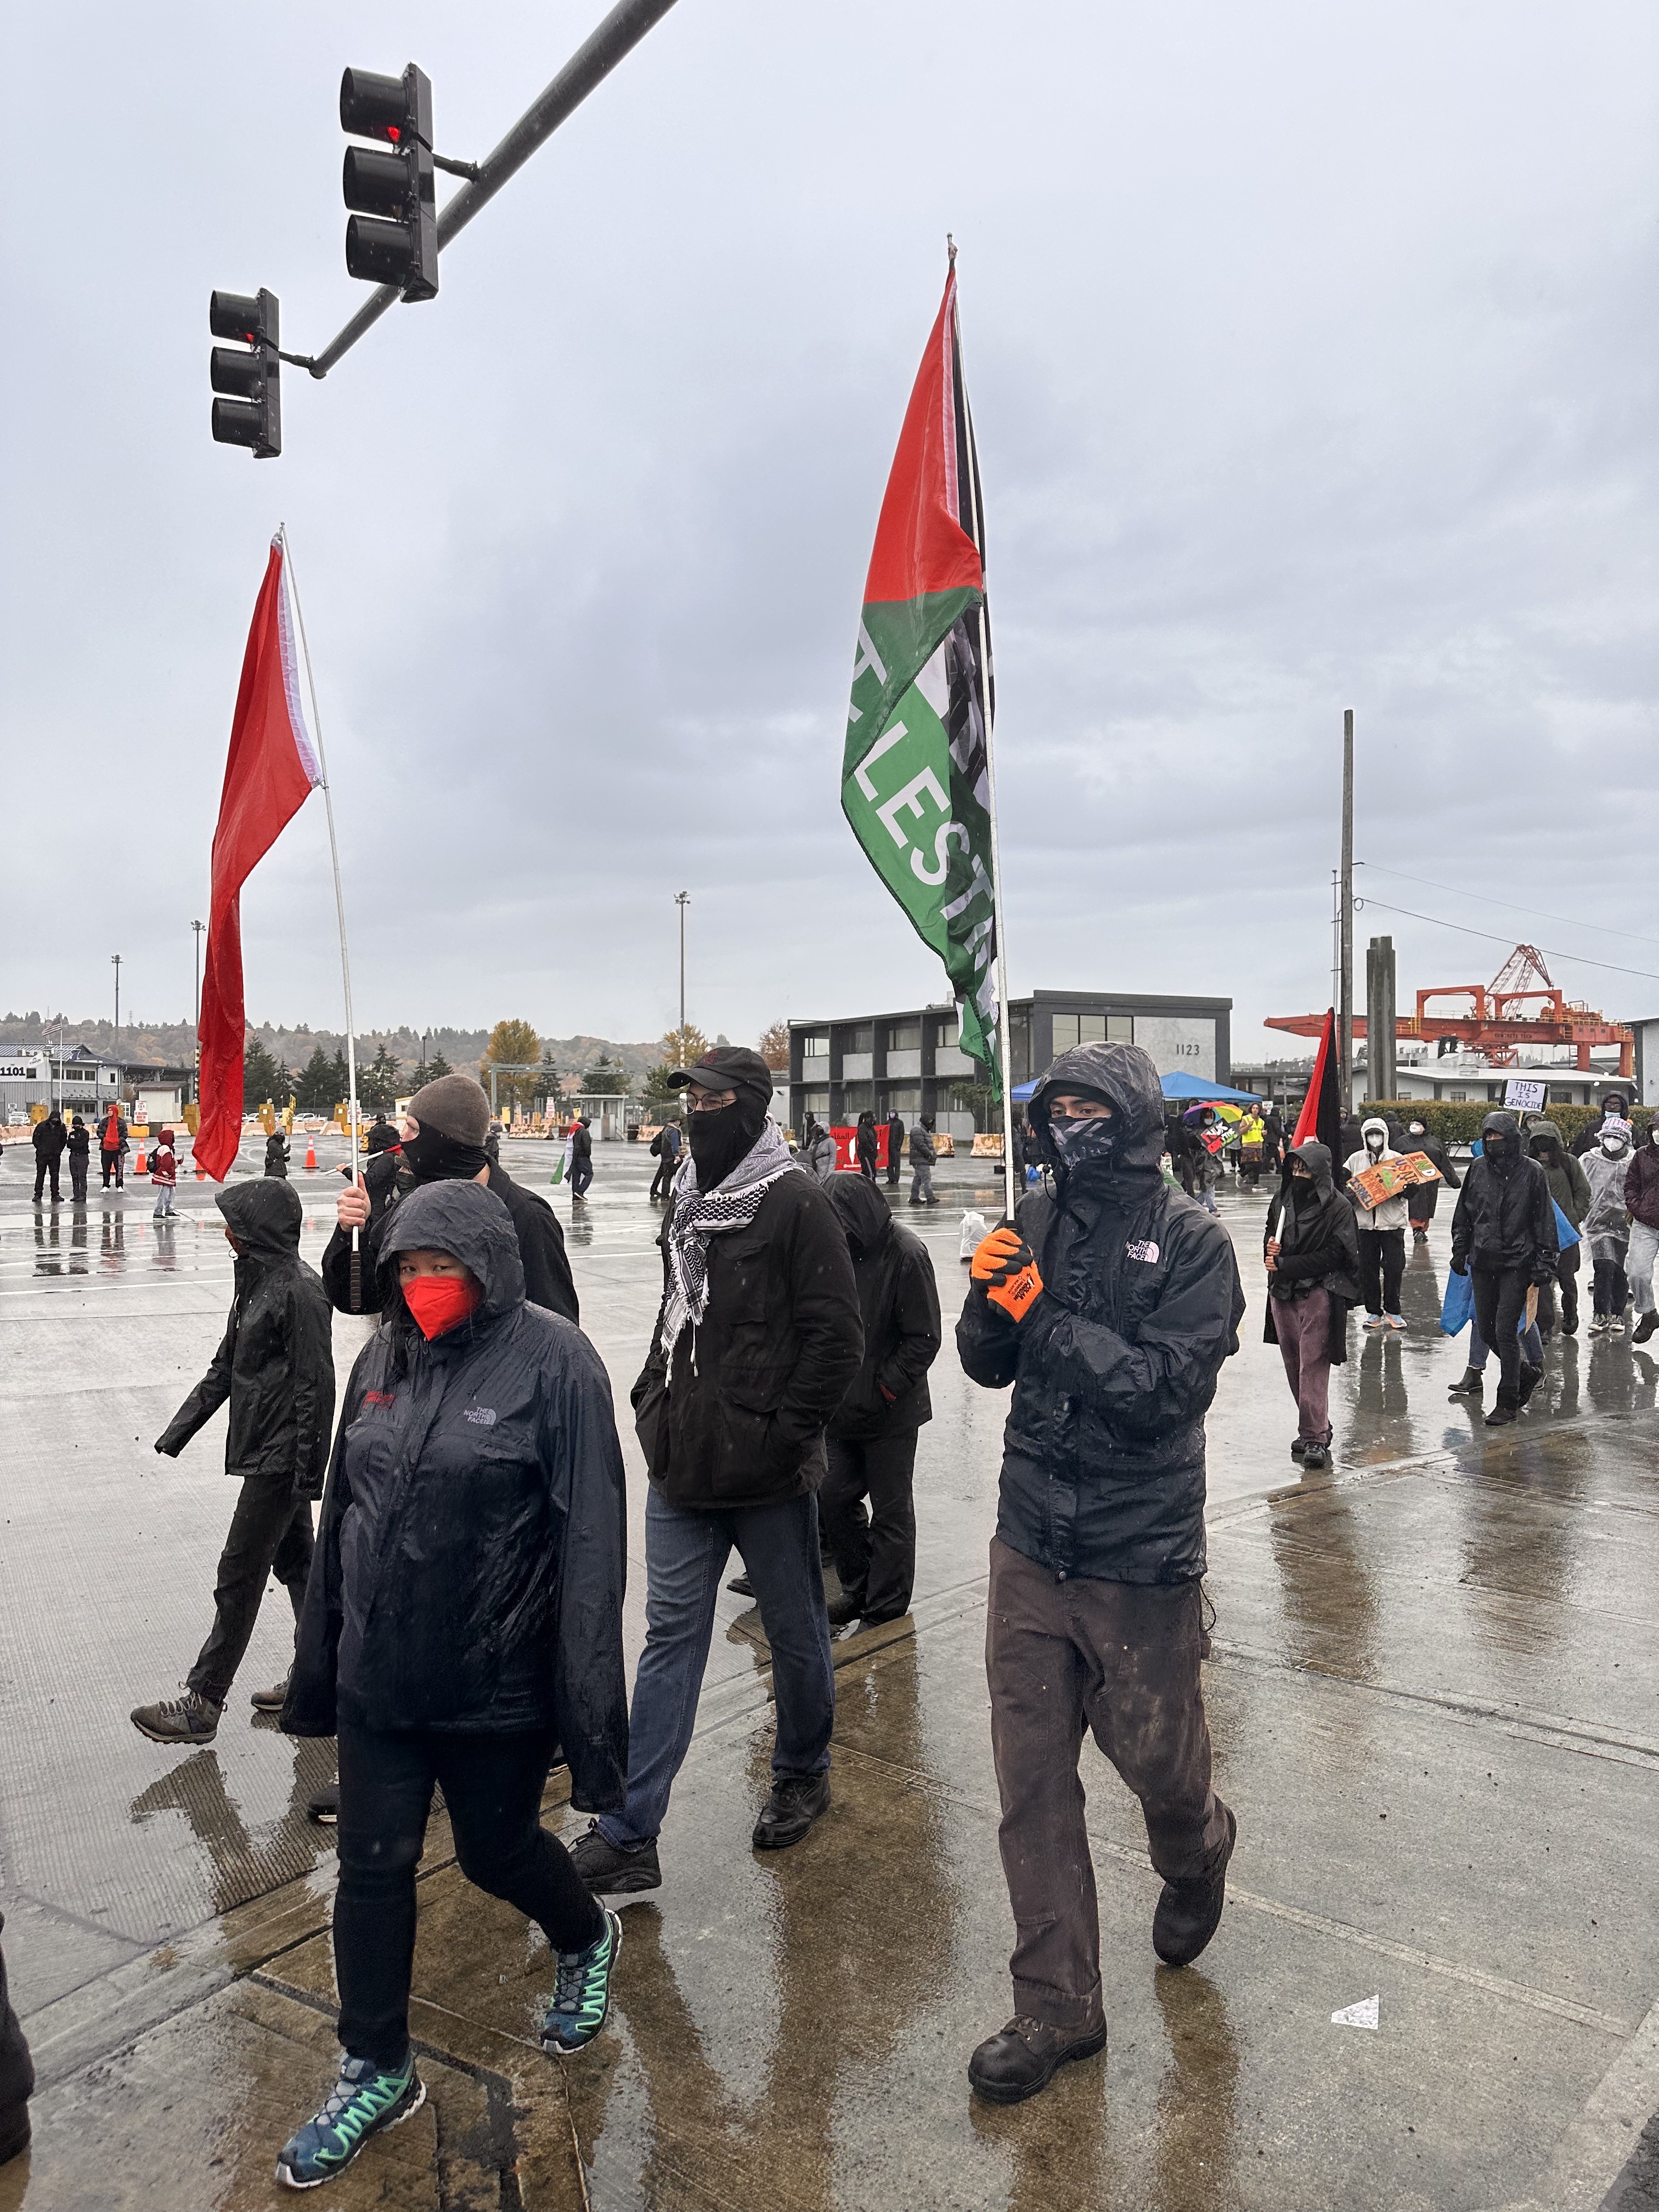 Protestors are keeping workers out from the Port of Tacoma. Multiple car blockades have been formed to impede road access. (Credit: Lauren Gallup / NWPB)